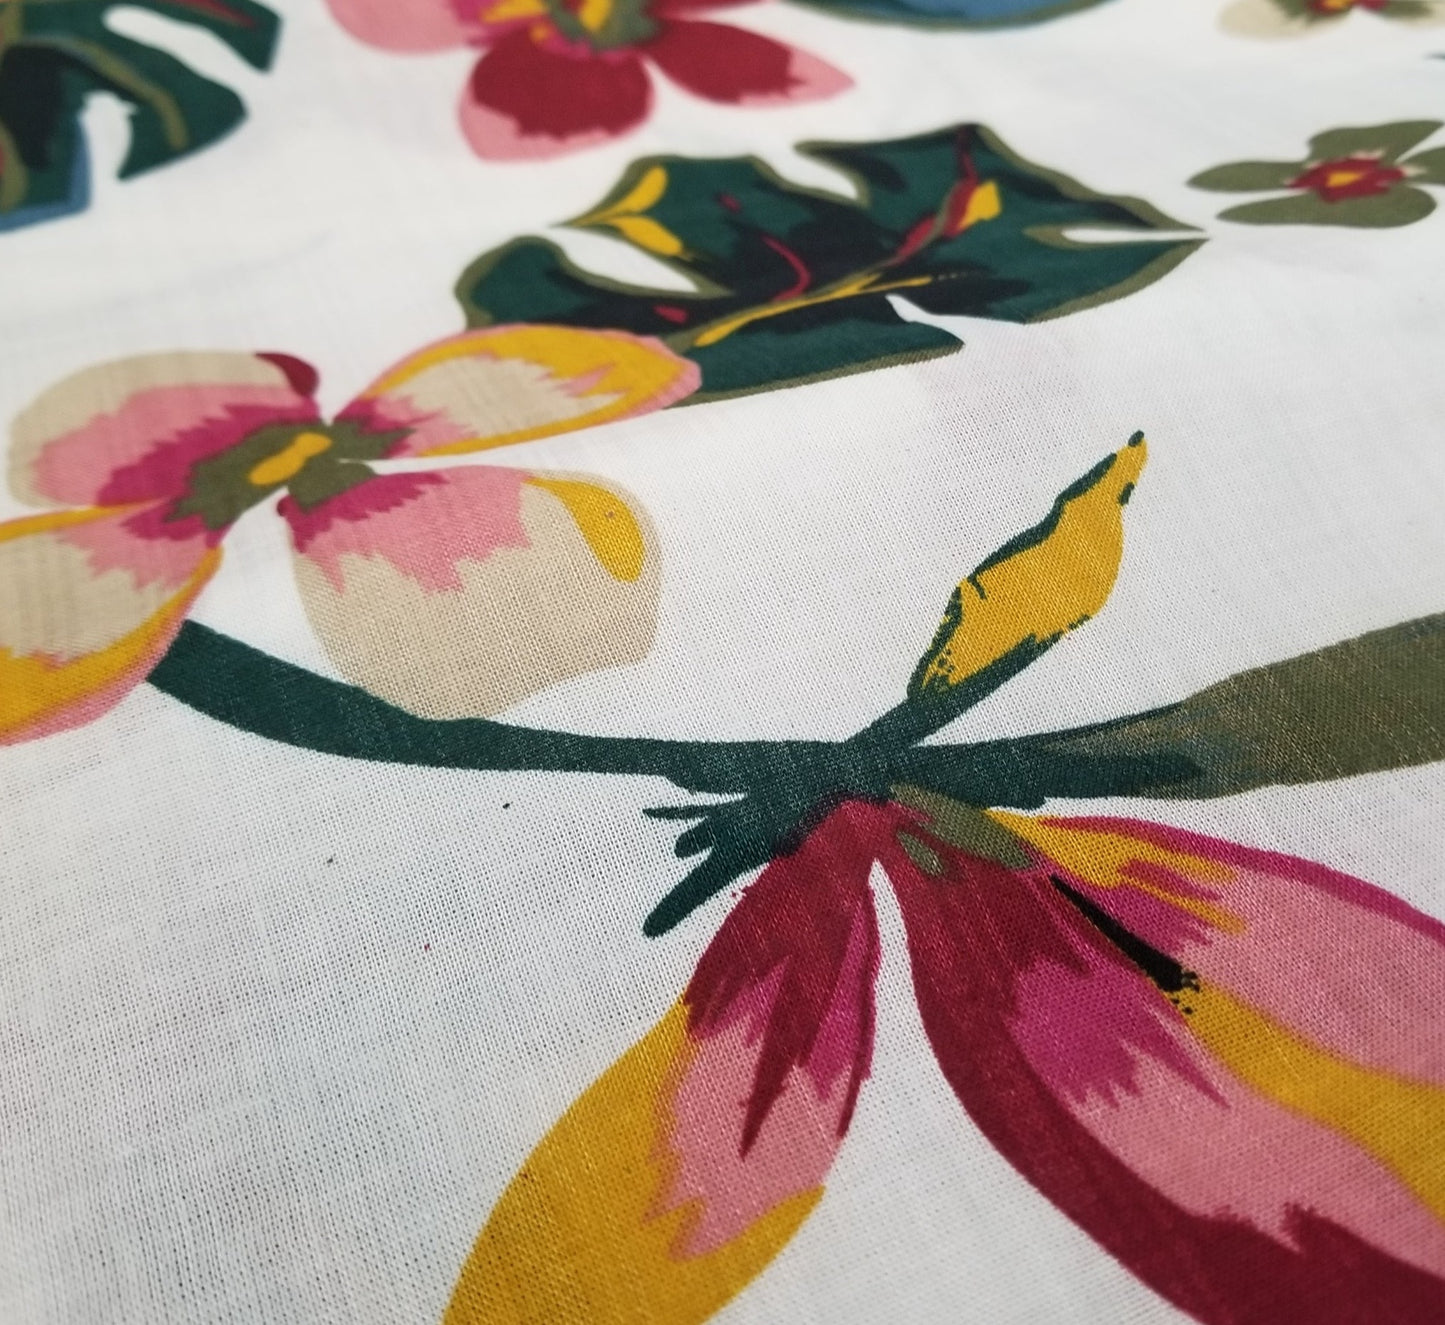 Designer Deadstock Resort Kailua Floral White Cotton Lawn 2.36 oz - Sold by the yard